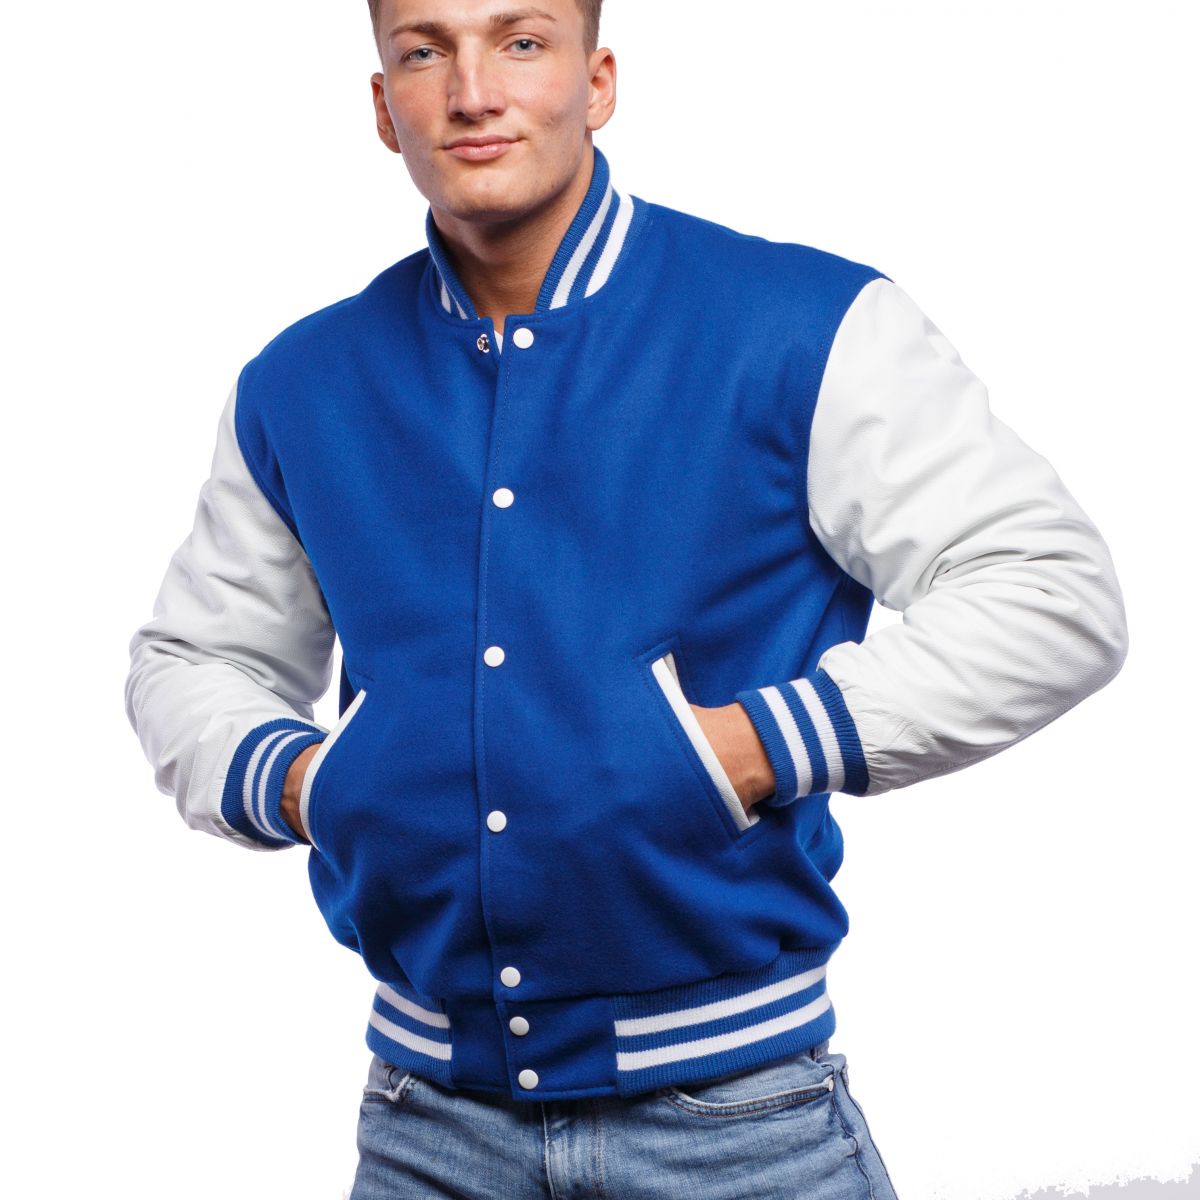 Bright Royal Wool Body & Bright White Leather Sleeves Letterman Jacket